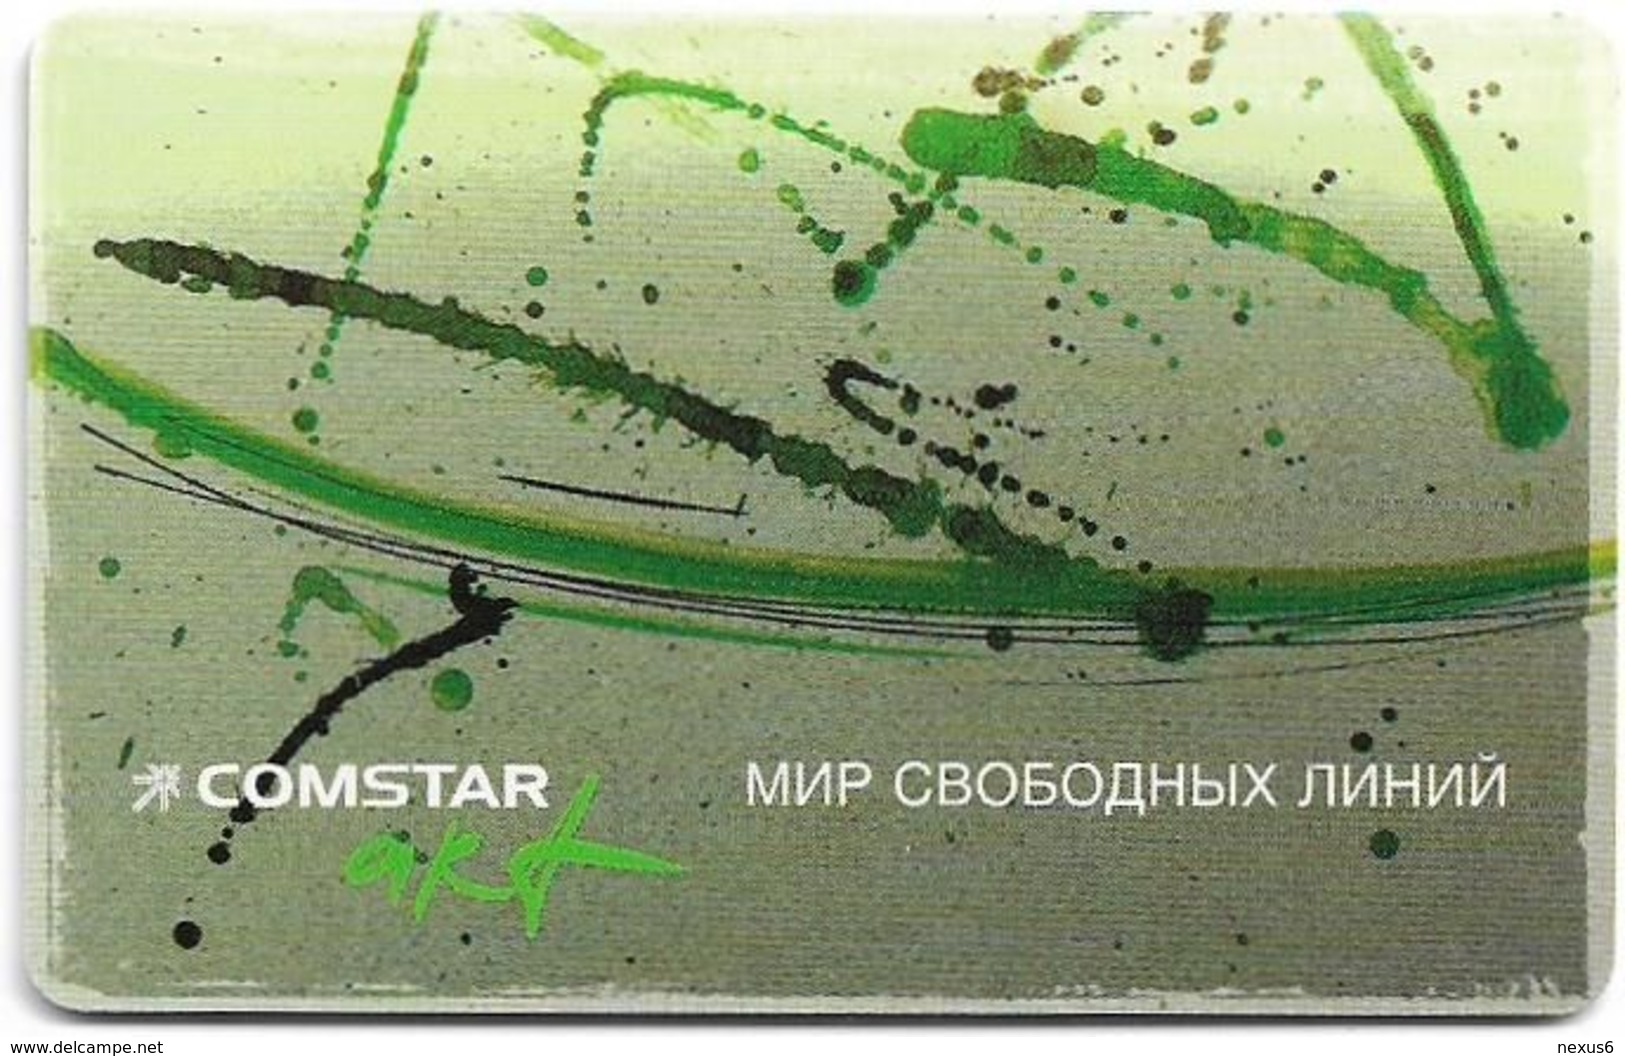 Russia - Comstar (chip) - Green Advertising, Art, 2001, 10$, 10.000ex, Used - Russia